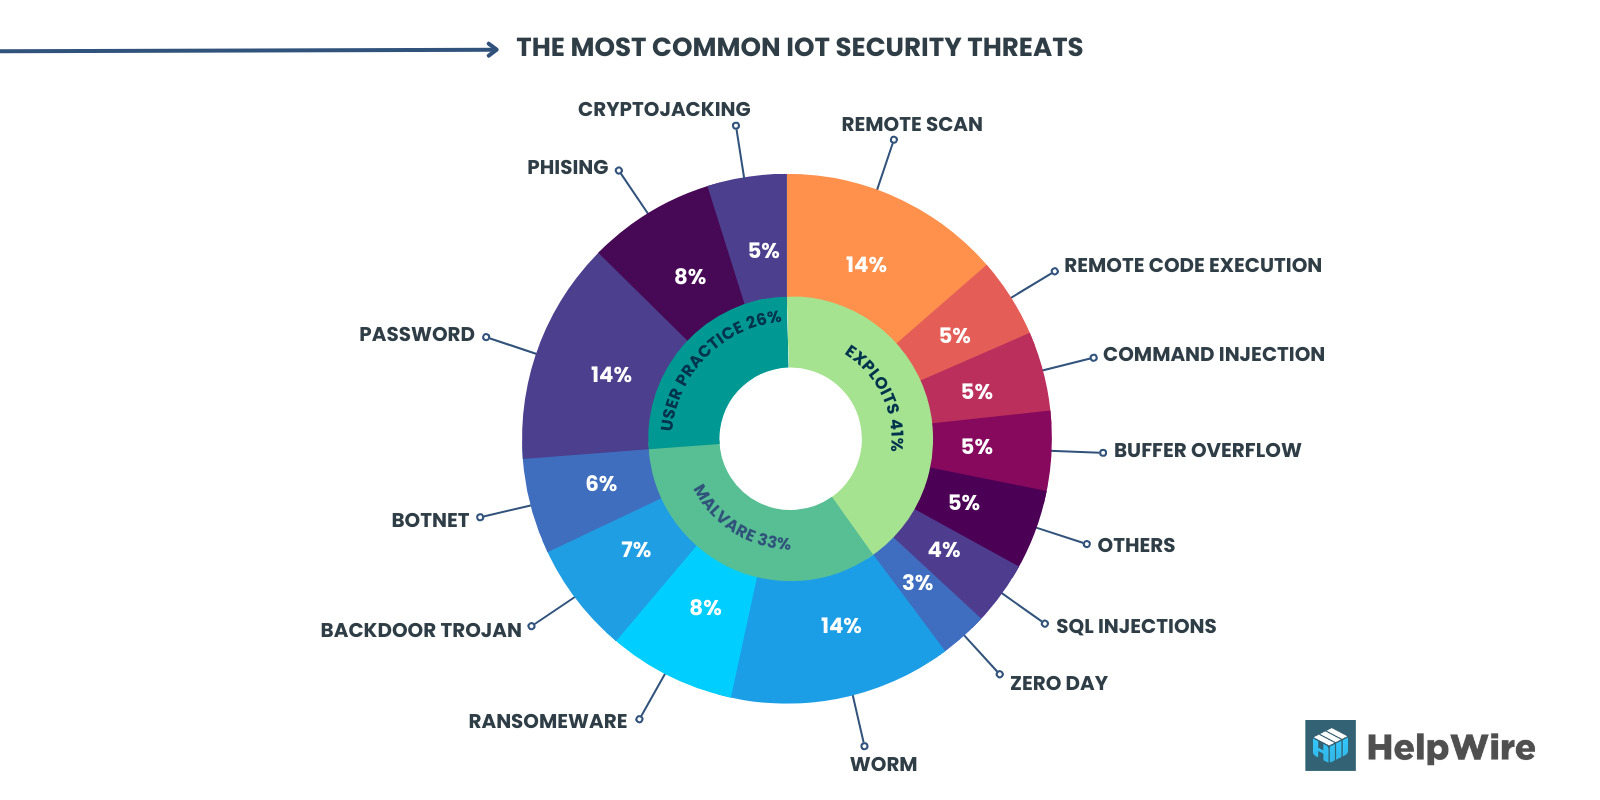 The most common IoT security threats